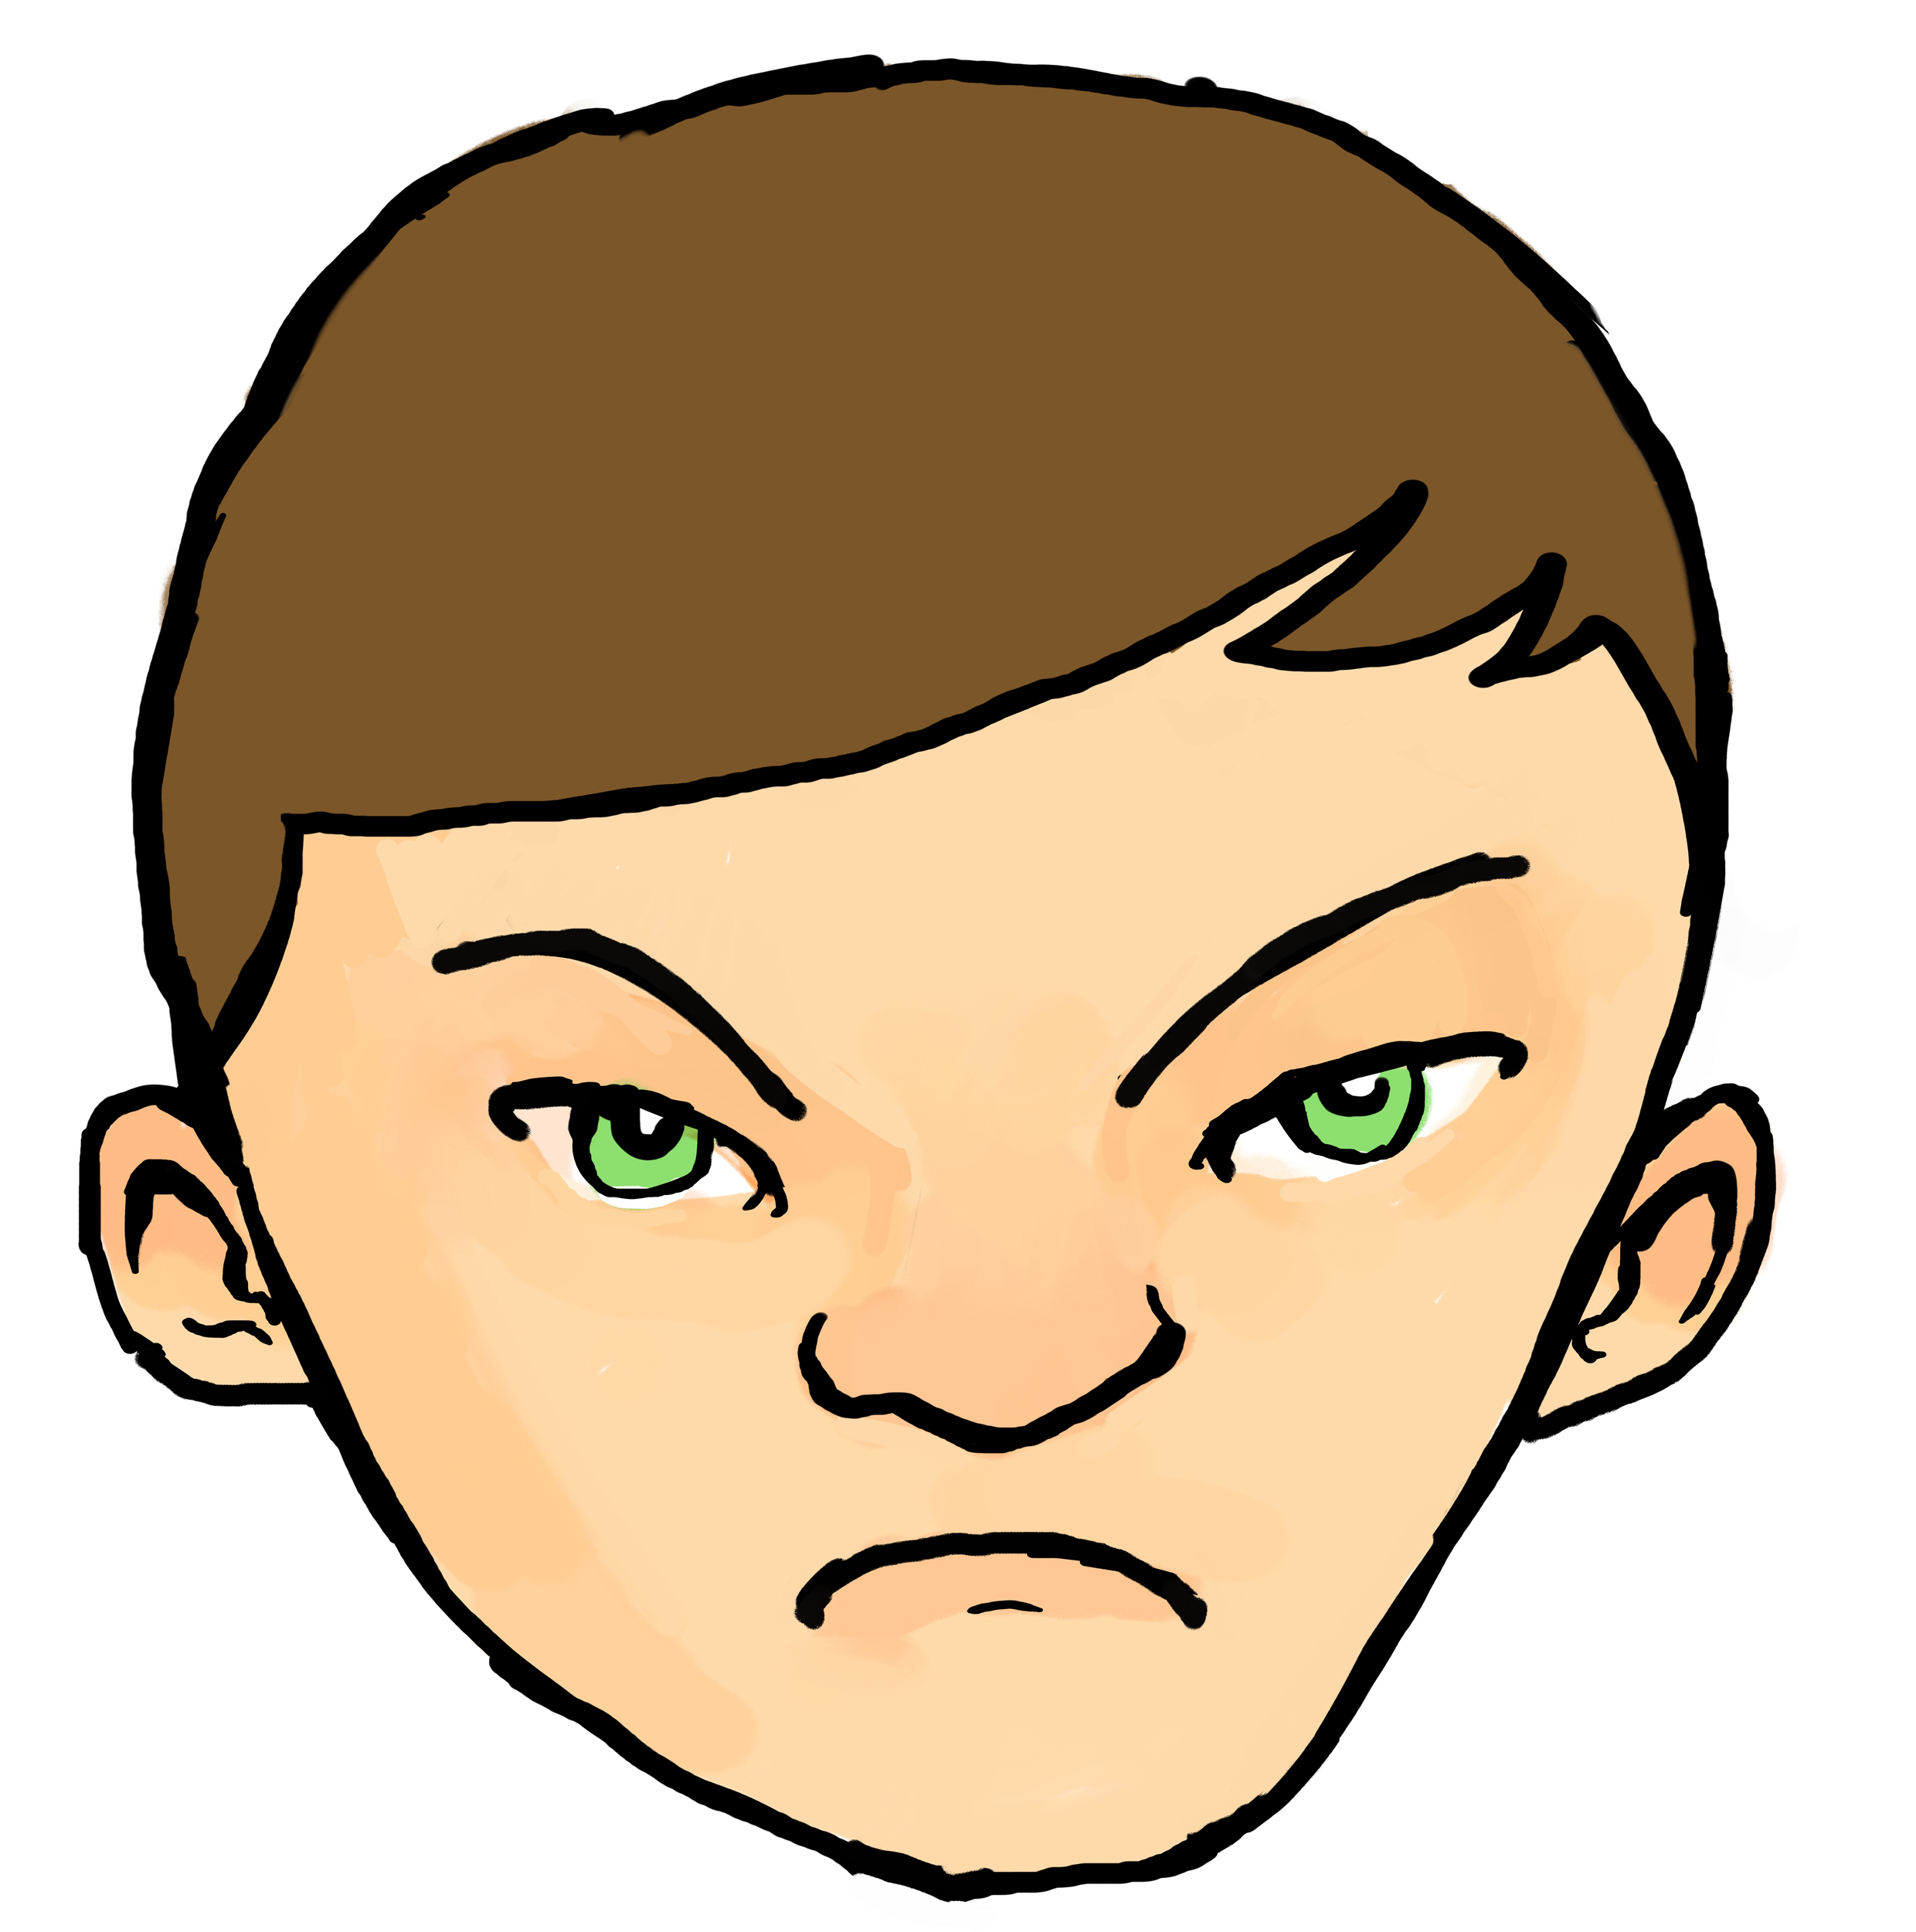 Frown Faces - ClipArt Best